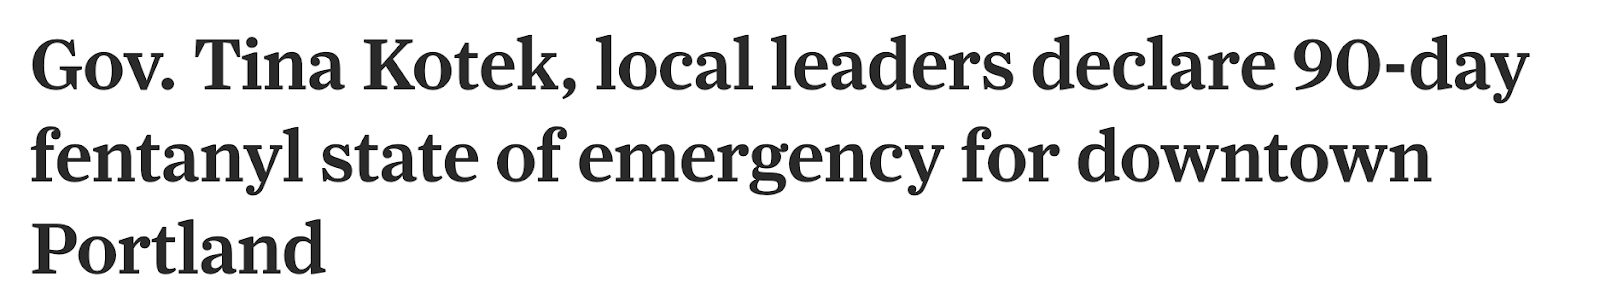 Headline that reads 'Gov. Tina Kotek, local leaders declare 90-day fentanyl state of emergency for downtown Portland'